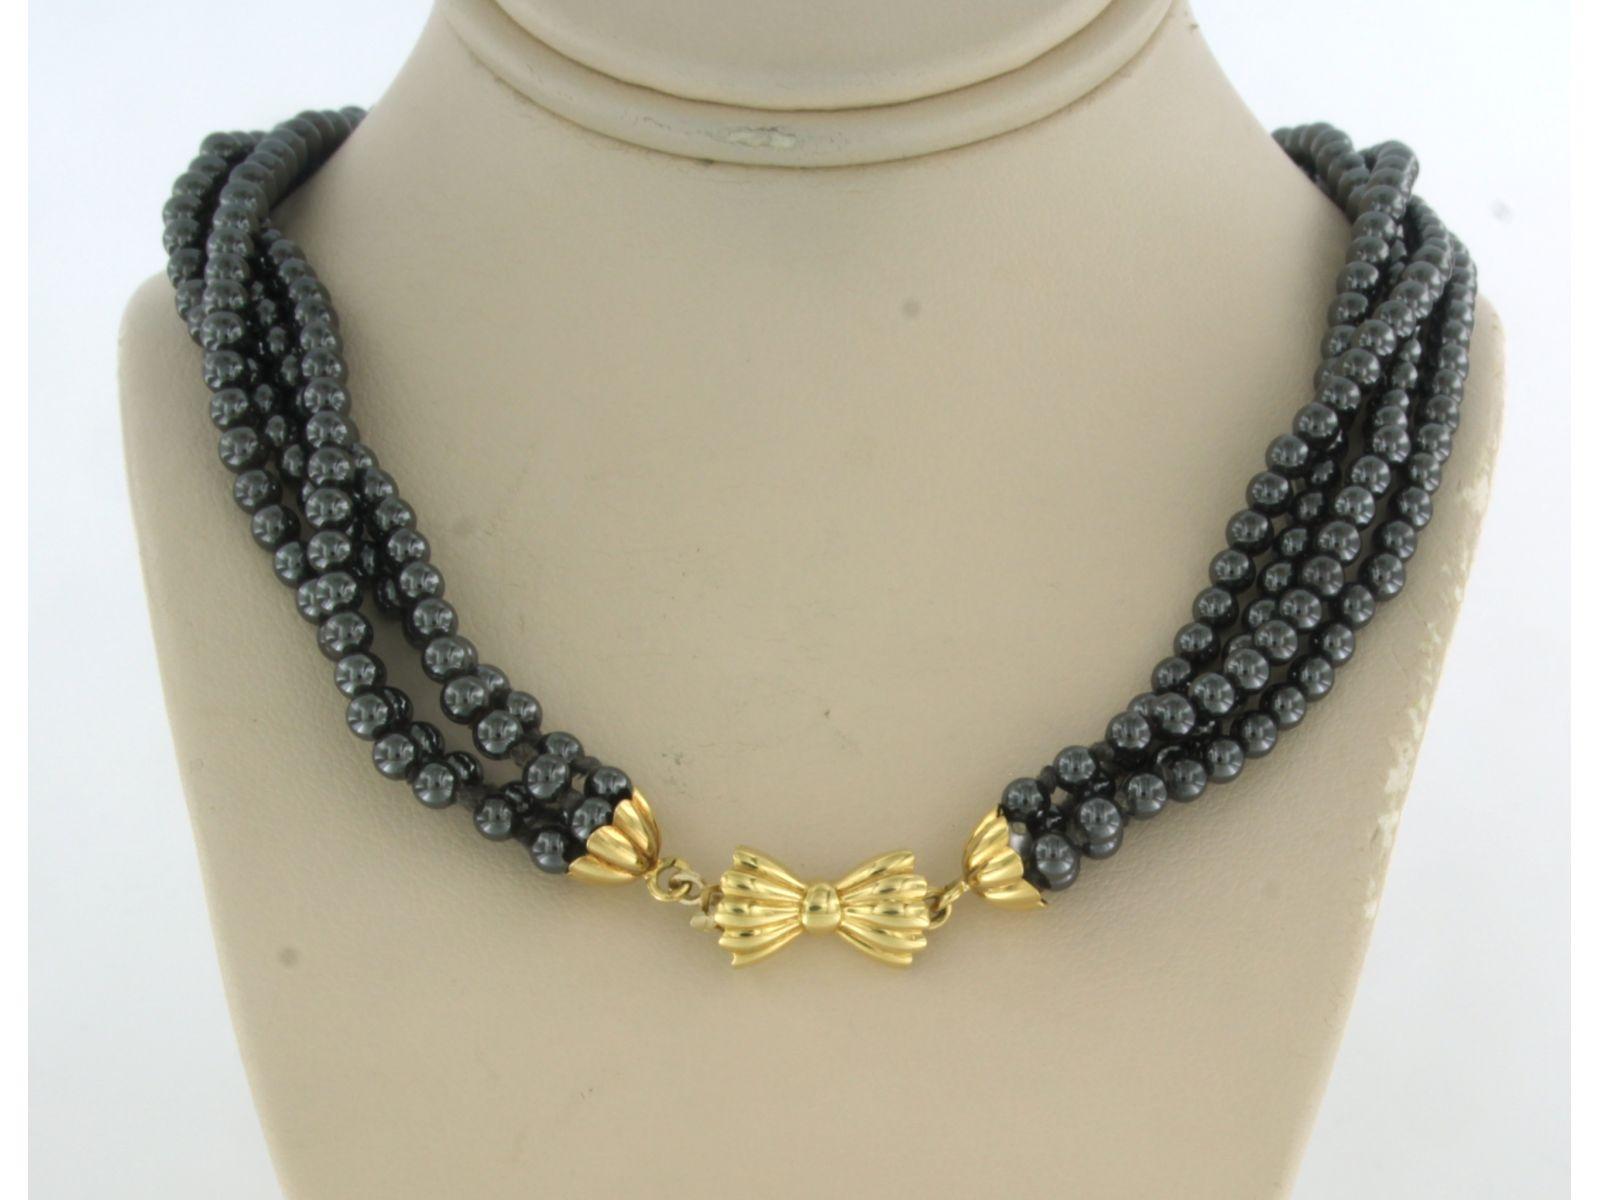 Modern 18k yellow gold clasp on a hematite bead necklace - 40 cm long For Sale